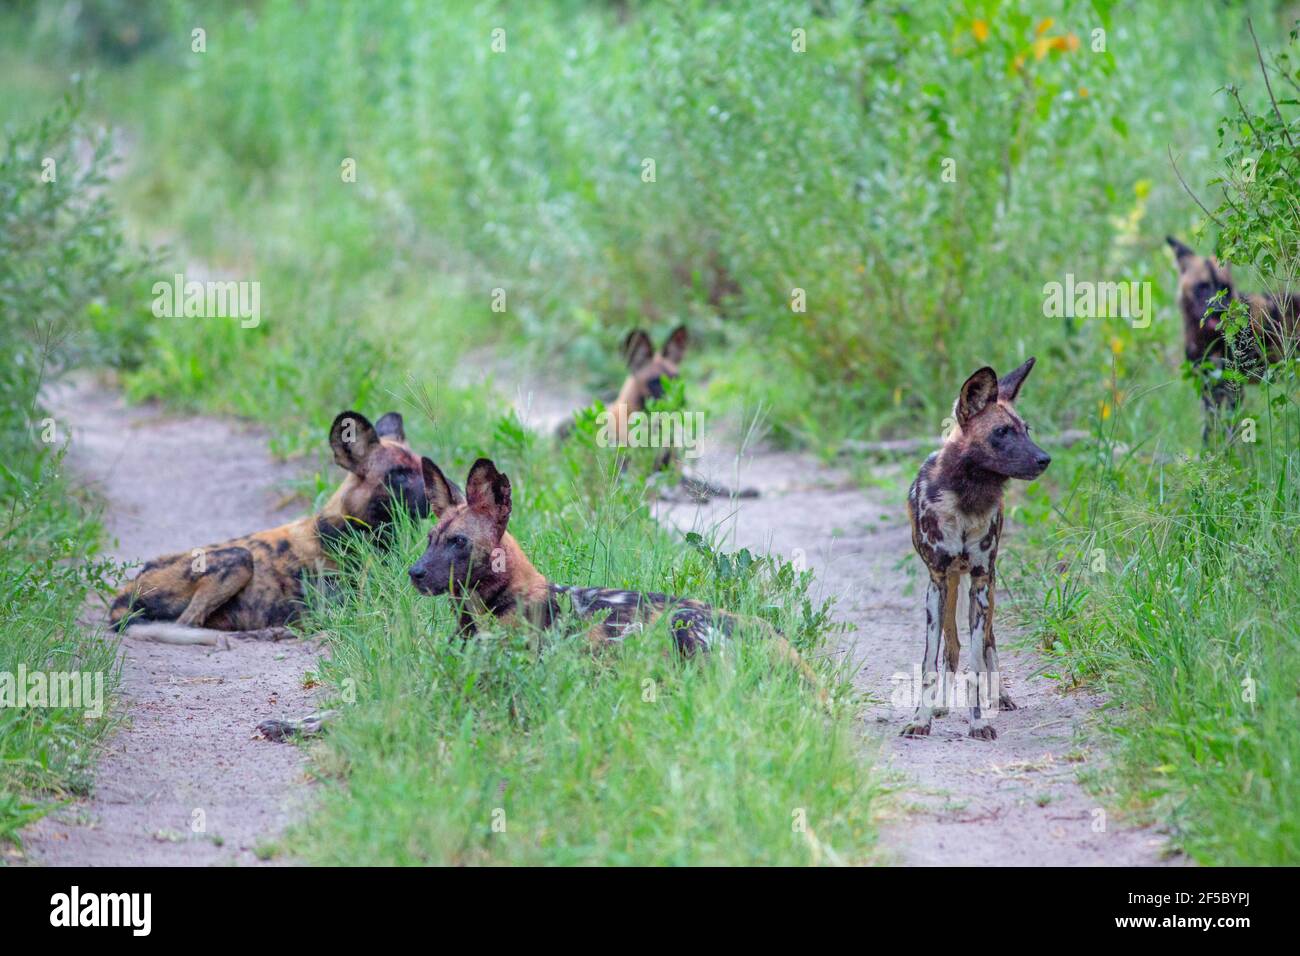 African Wild Hunting Dog  or Painted Wolf  (Lycaon pictus).  Safari vehicle, enforced, to stop in its tracks by dog pack relaxing. Grassland savanna. Stock Photo